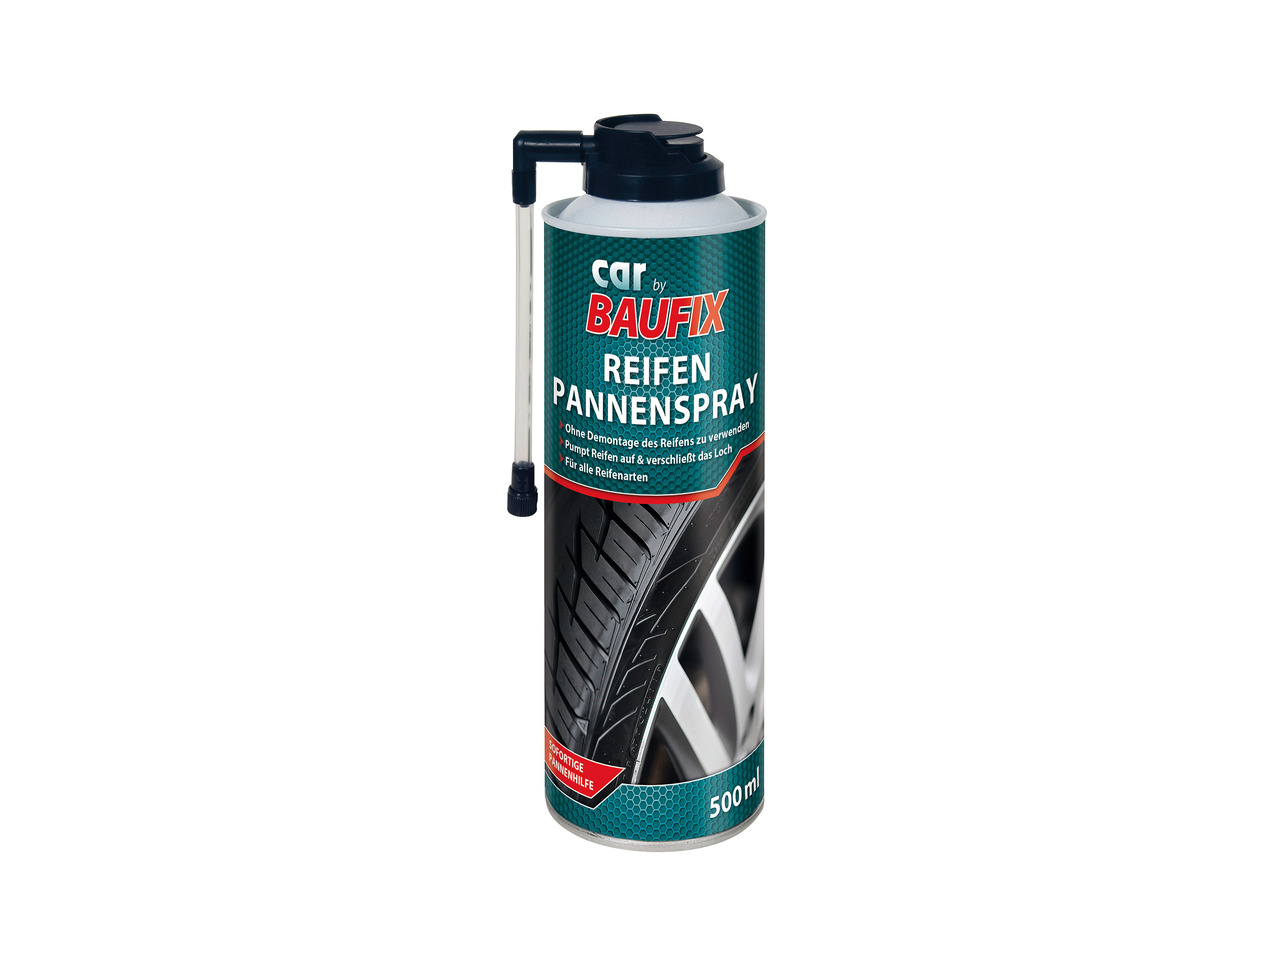 Car by Baufix Emergency Tyre Sealer and Inflater1